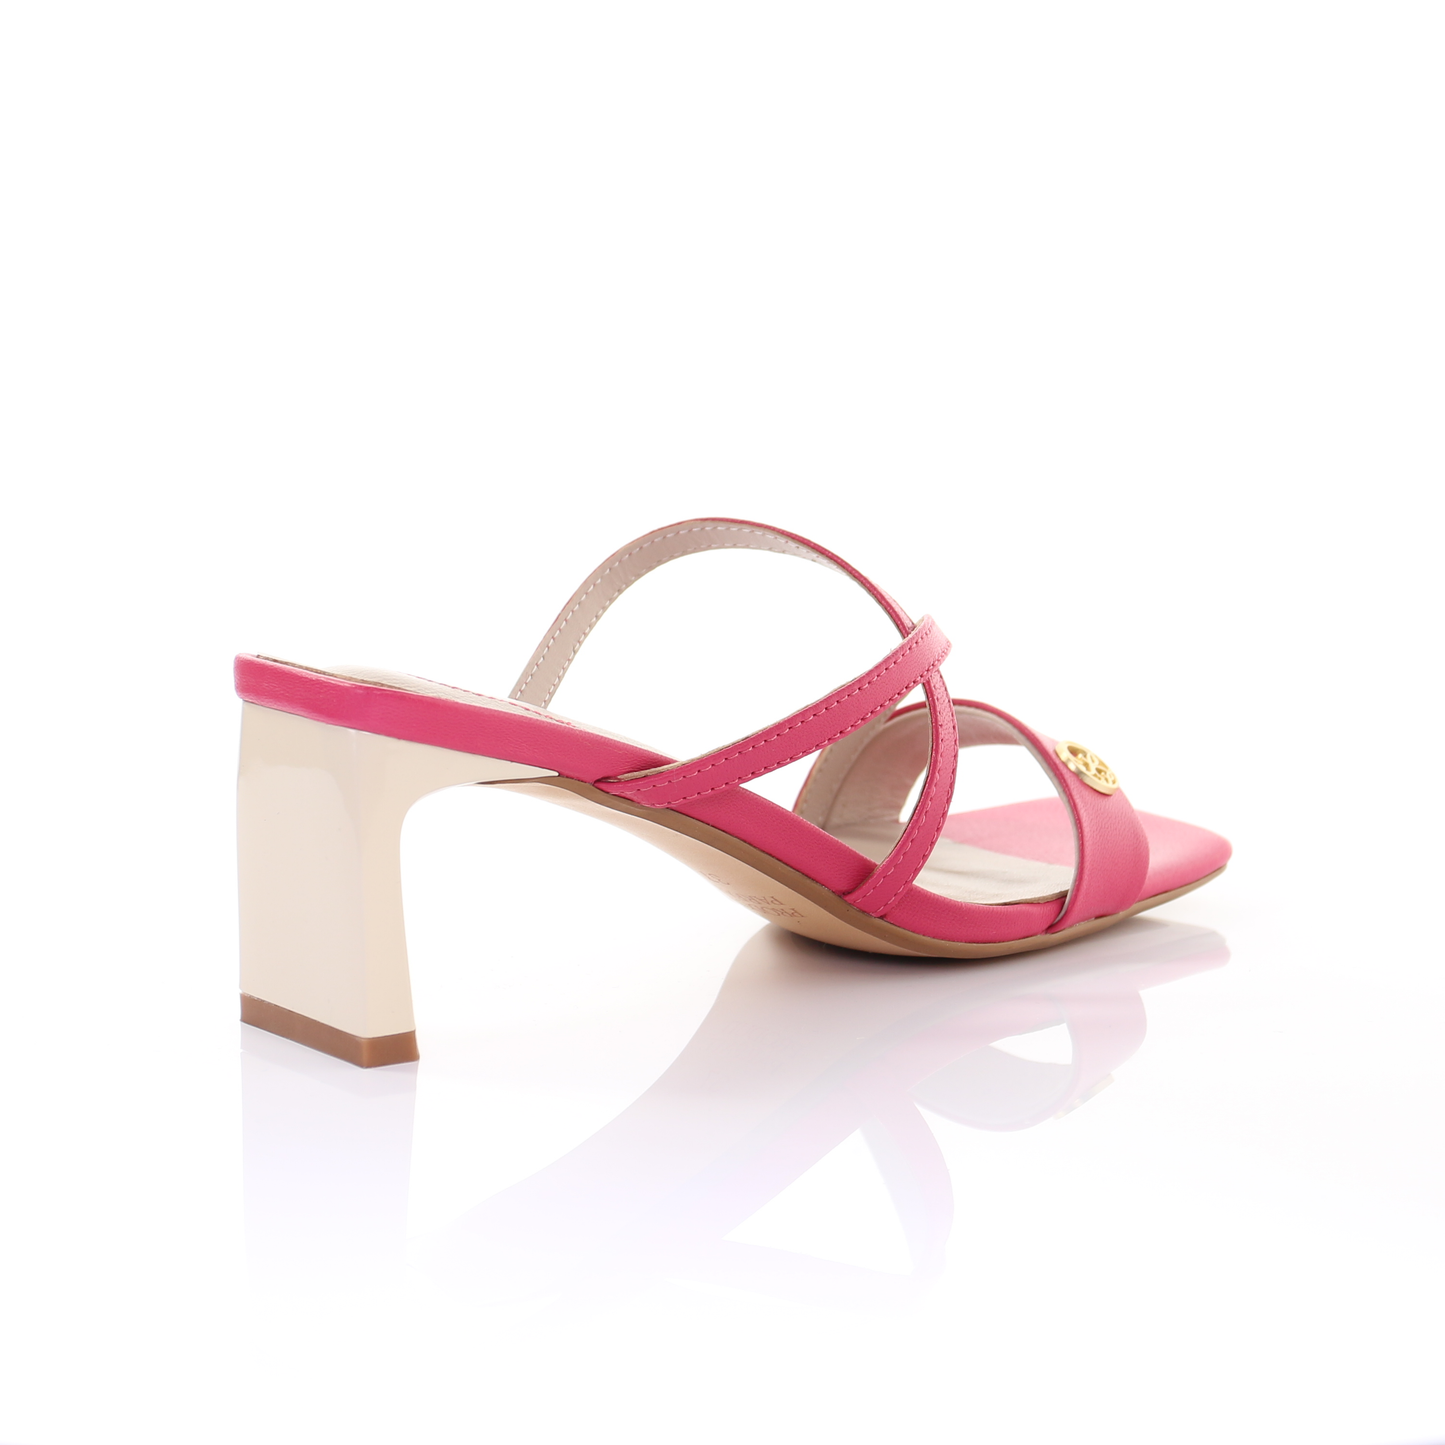 Square toe leather strappy heeled sandal- Peach